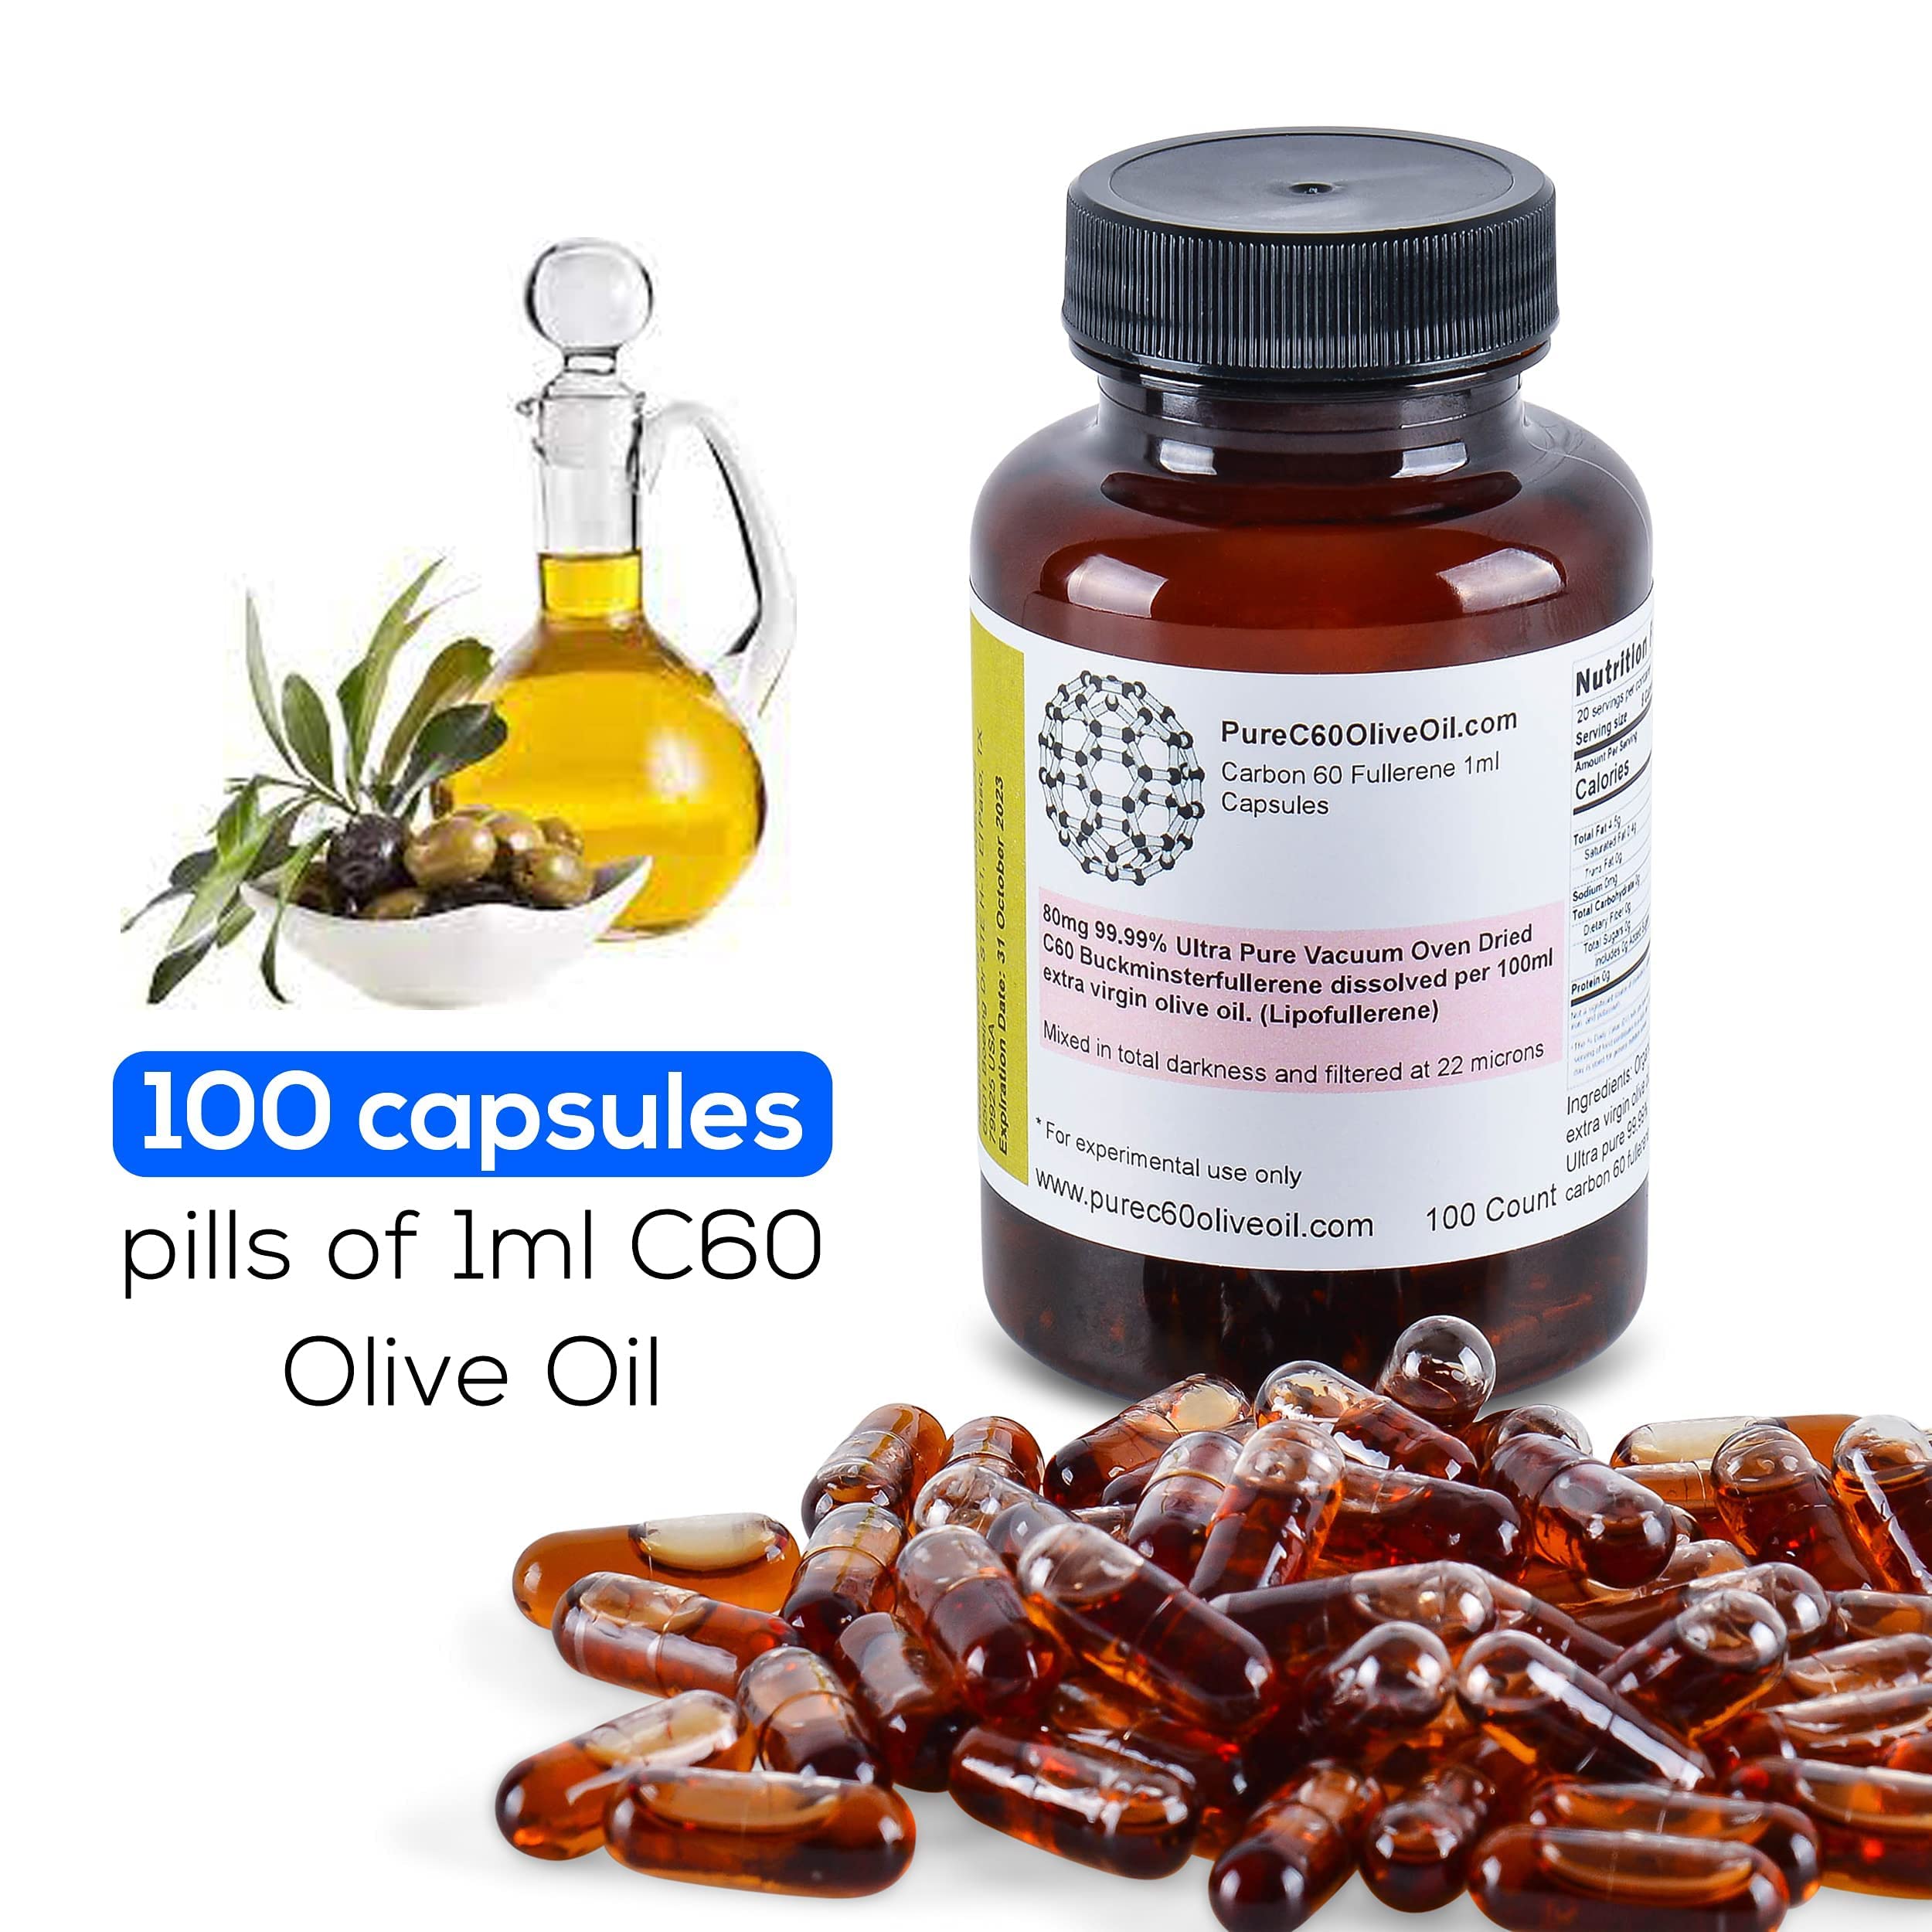 PureC60OliveOil C60 Olive Oil Capsules Pills 100ml / 3.4 Fl Oz - 99.99% Carbon 60 Solvent Free 80mg - Food Grade - Carbon 60 Olive Oil - From The Leading Global Producer